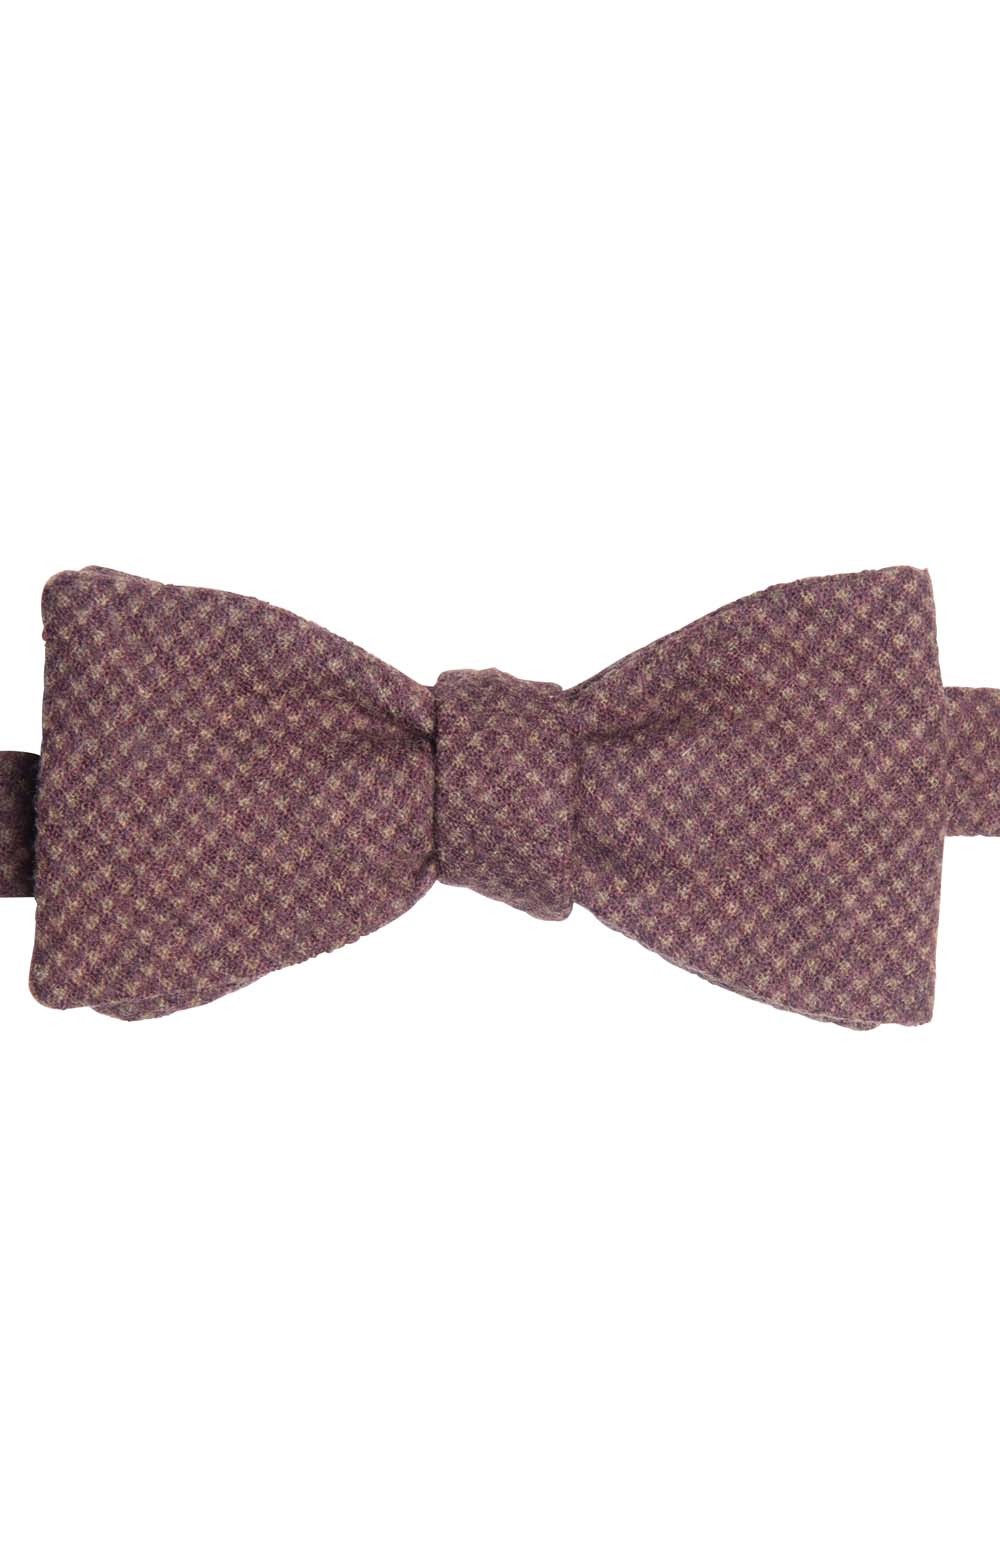 Mens's Wool Houndstooth Bow Tie, Blue/Camel